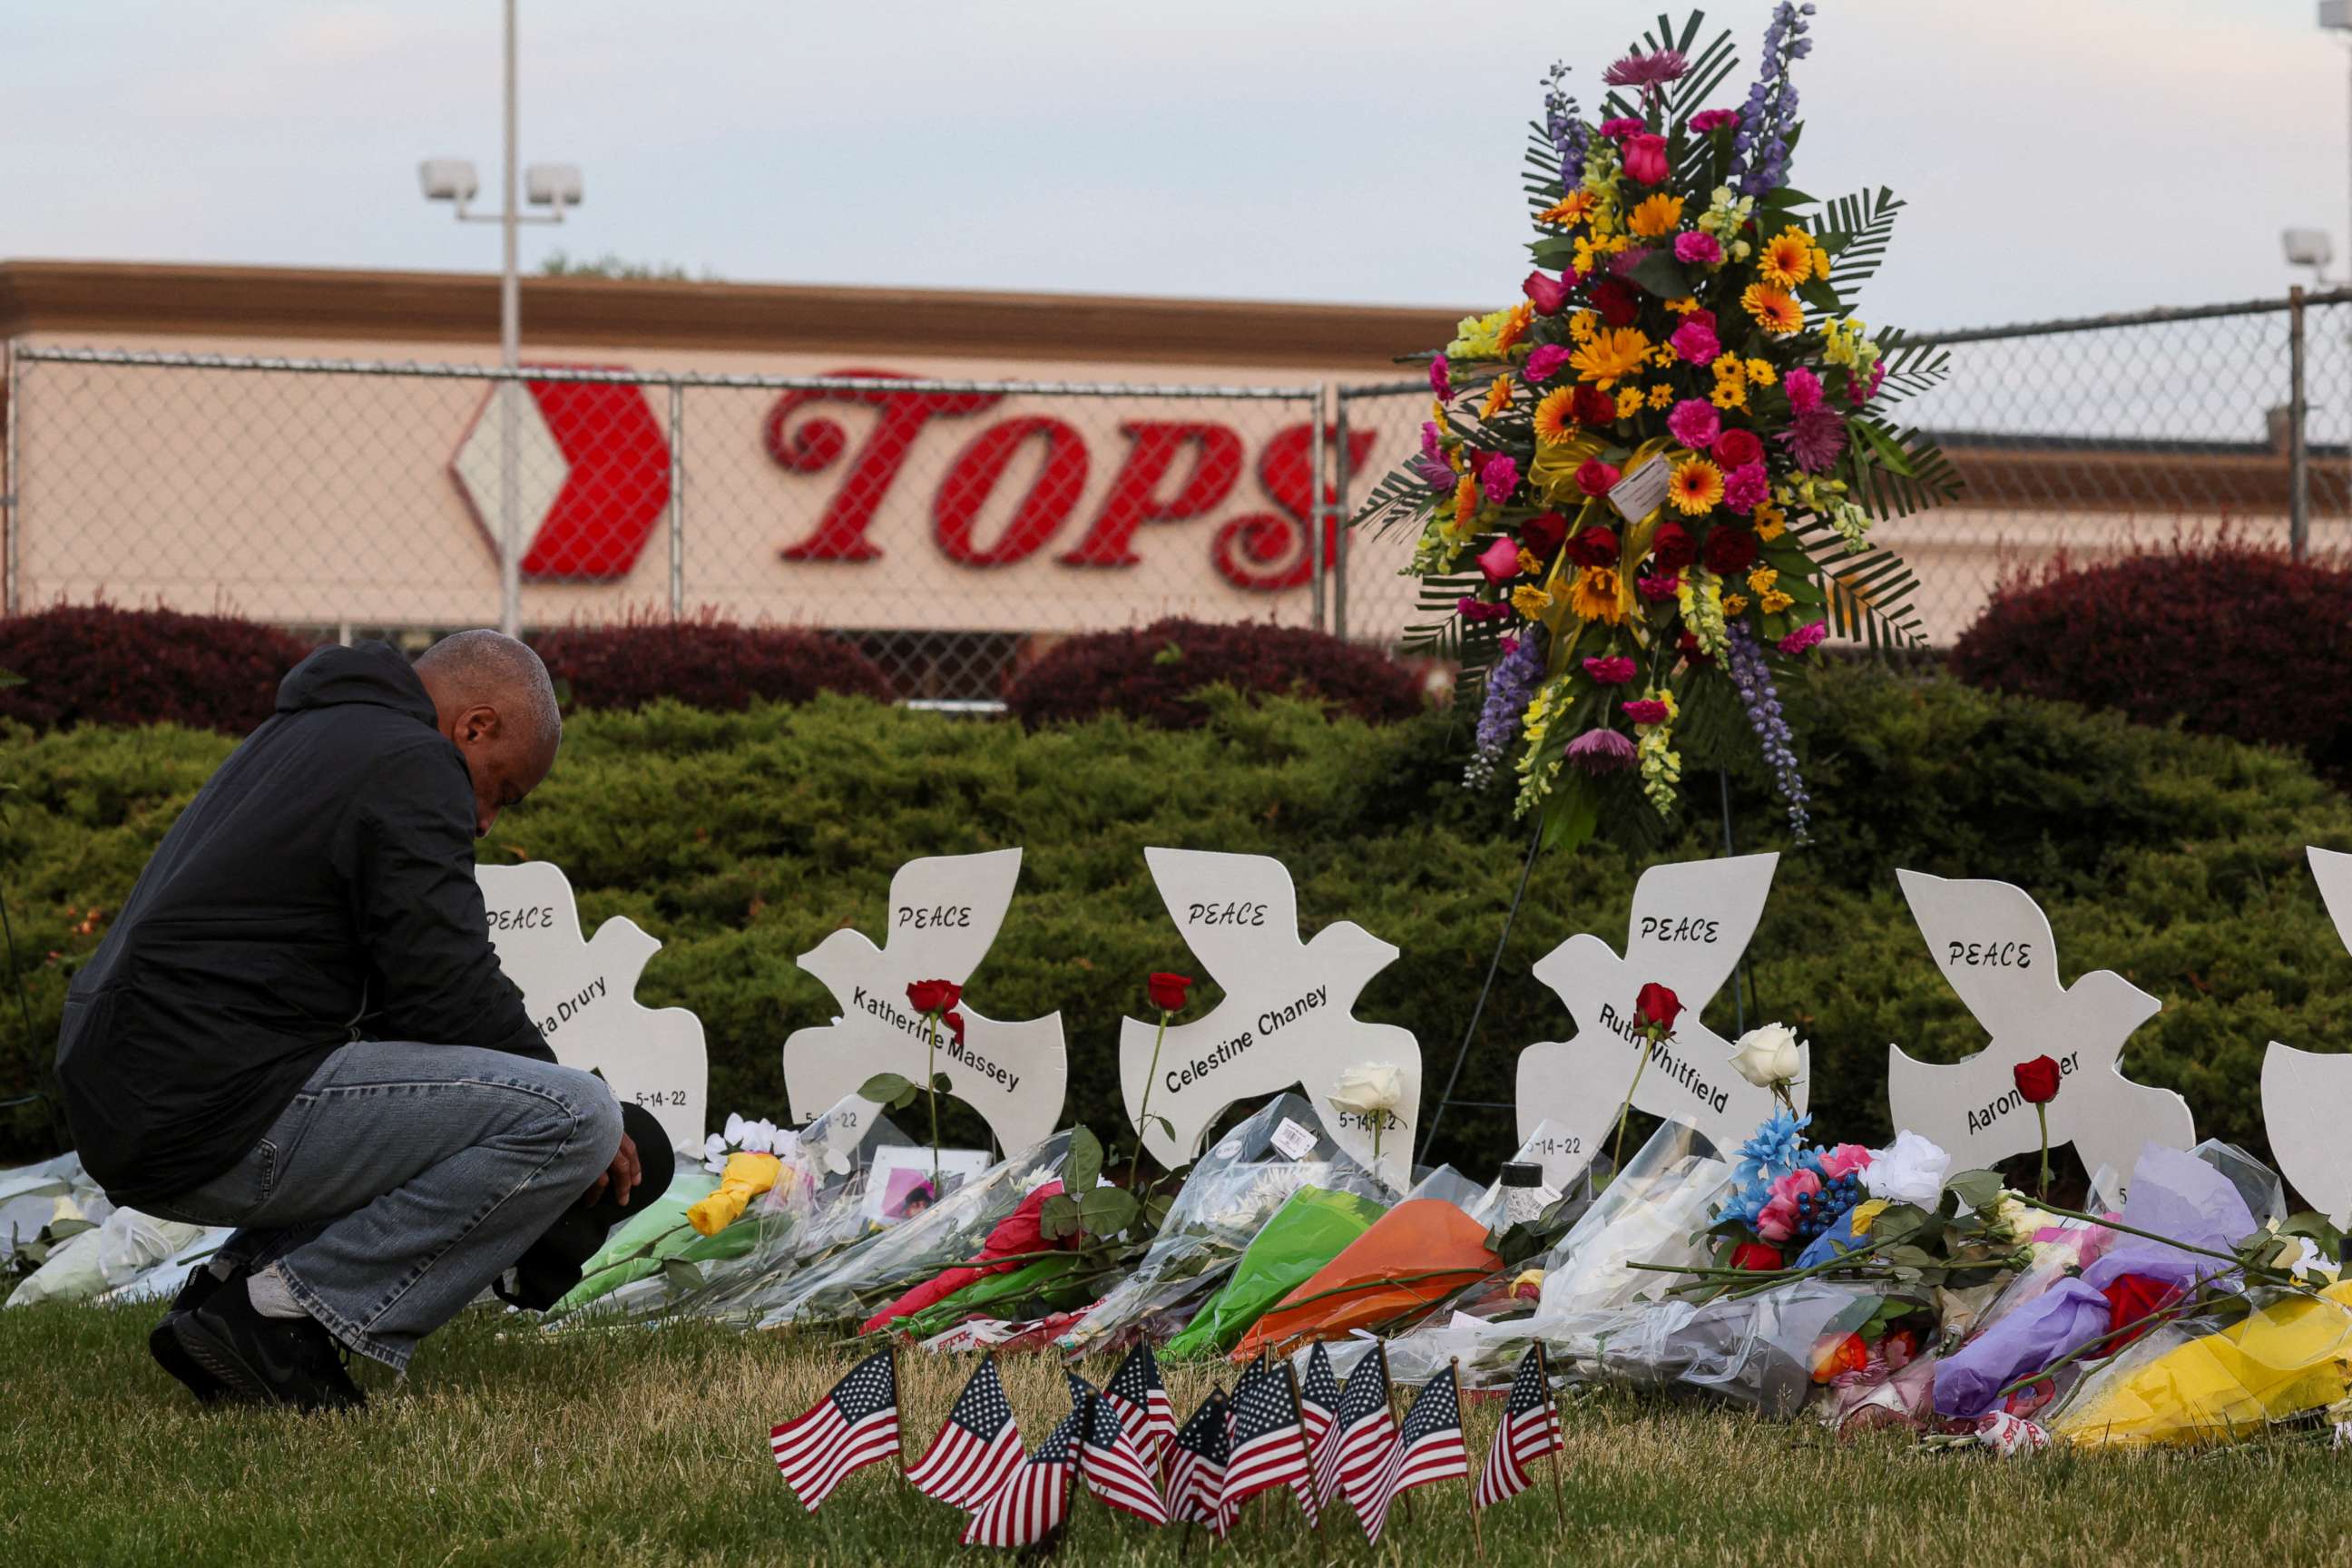 PHOTO: A man prays at a memorial at the scene of a weekend shooting at a Tops supermarket in Buffalo, N.Y., May 19, 2022.